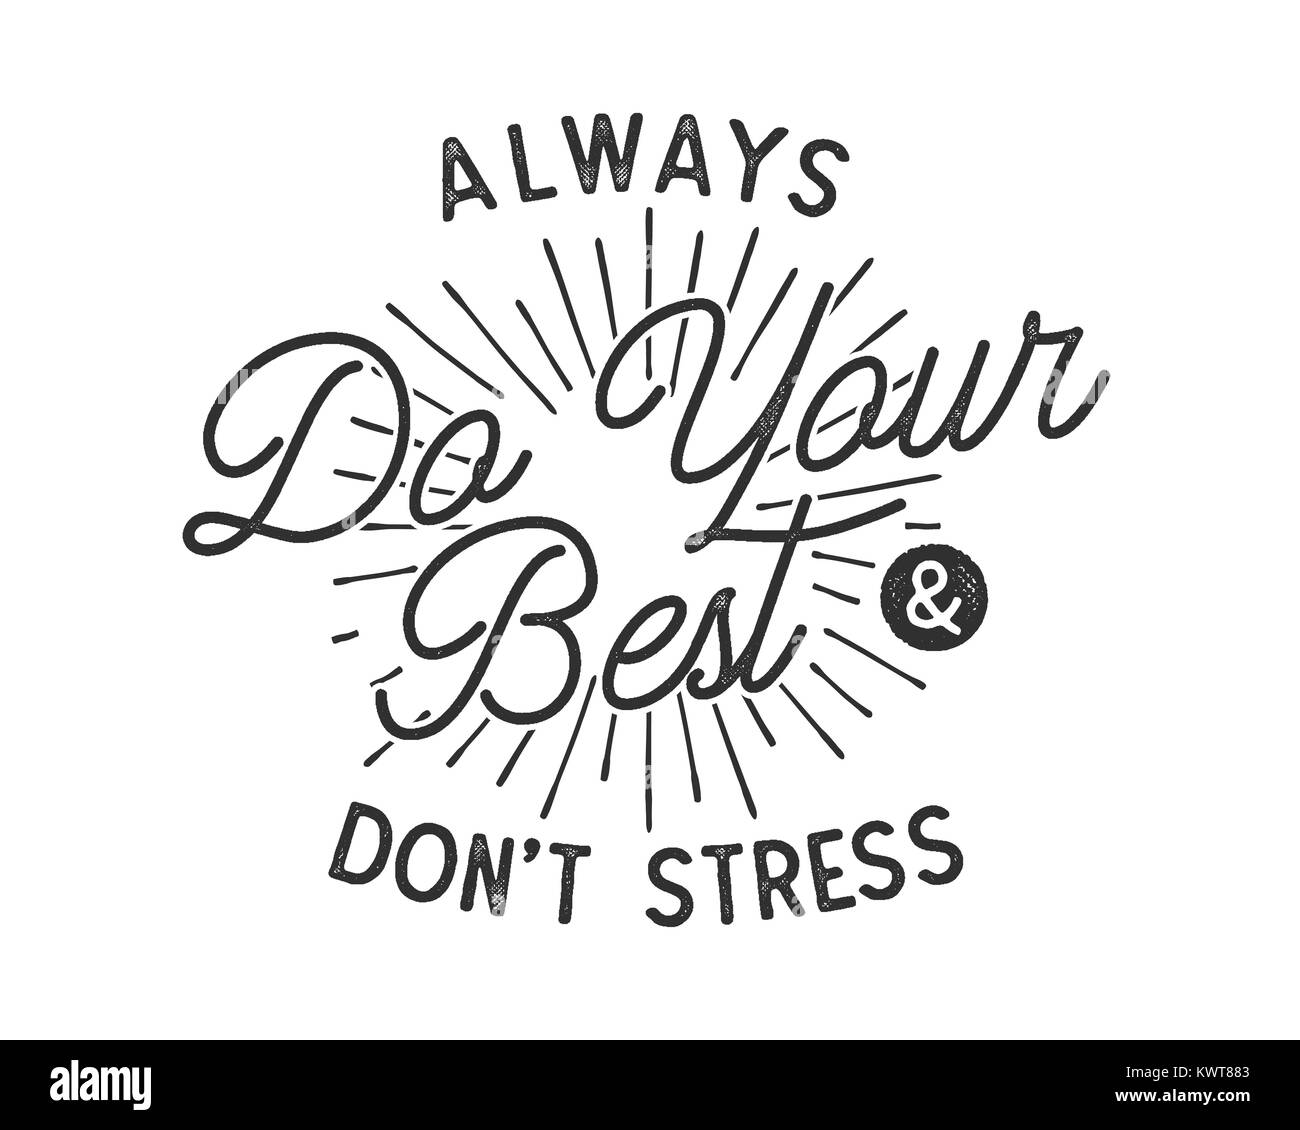 Do your best typography quote concept. Inspirational poster in retro style. Good for t shirts and other tee prints. Stock vector illustration. Monochrome calligraphy, lettering insignia Stock Vector